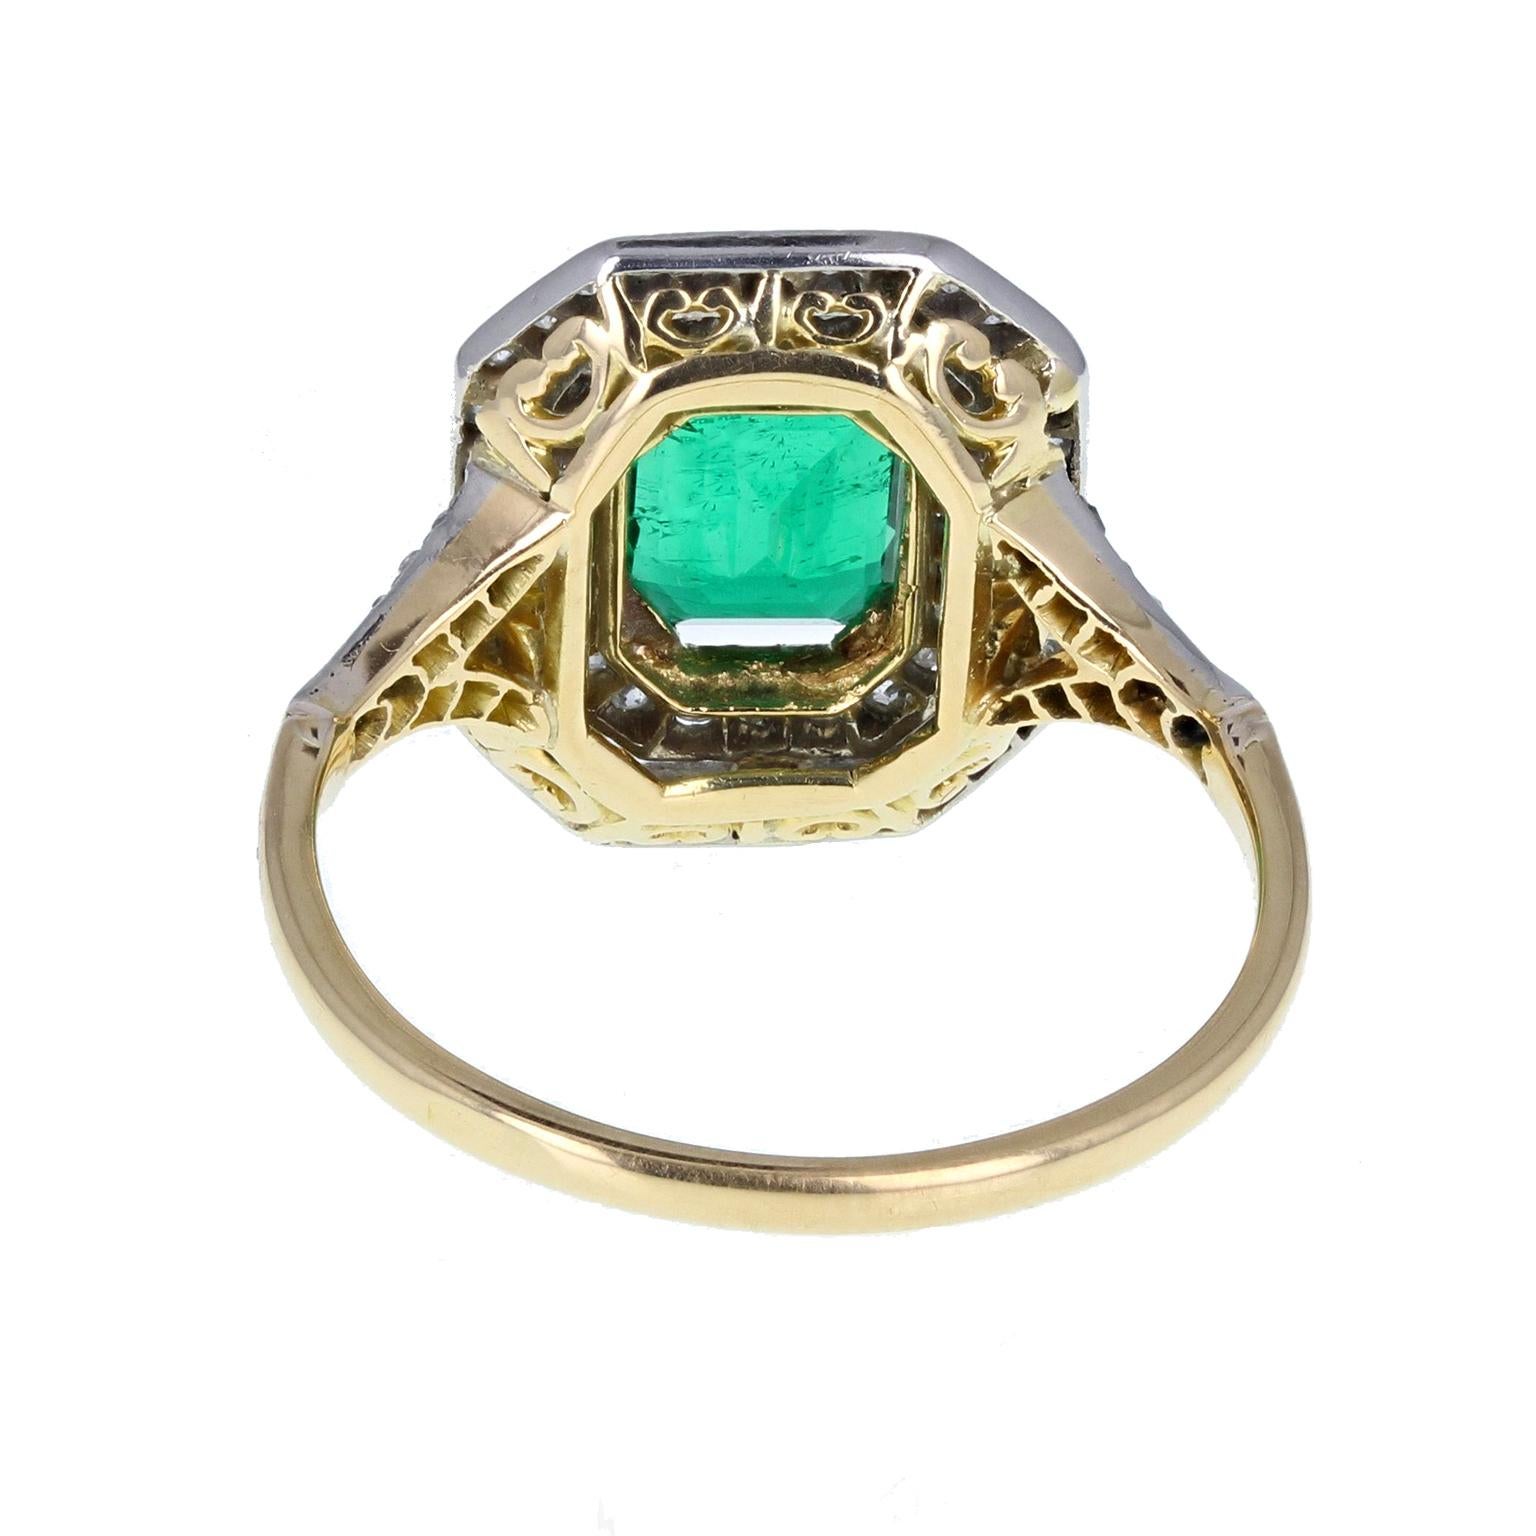 Edwardian 18 Carat Gold Certificated Minor Oil Colombian Emerald Diamond Ring In Excellent Condition For Sale In Newcastle Upon Tyne, GB